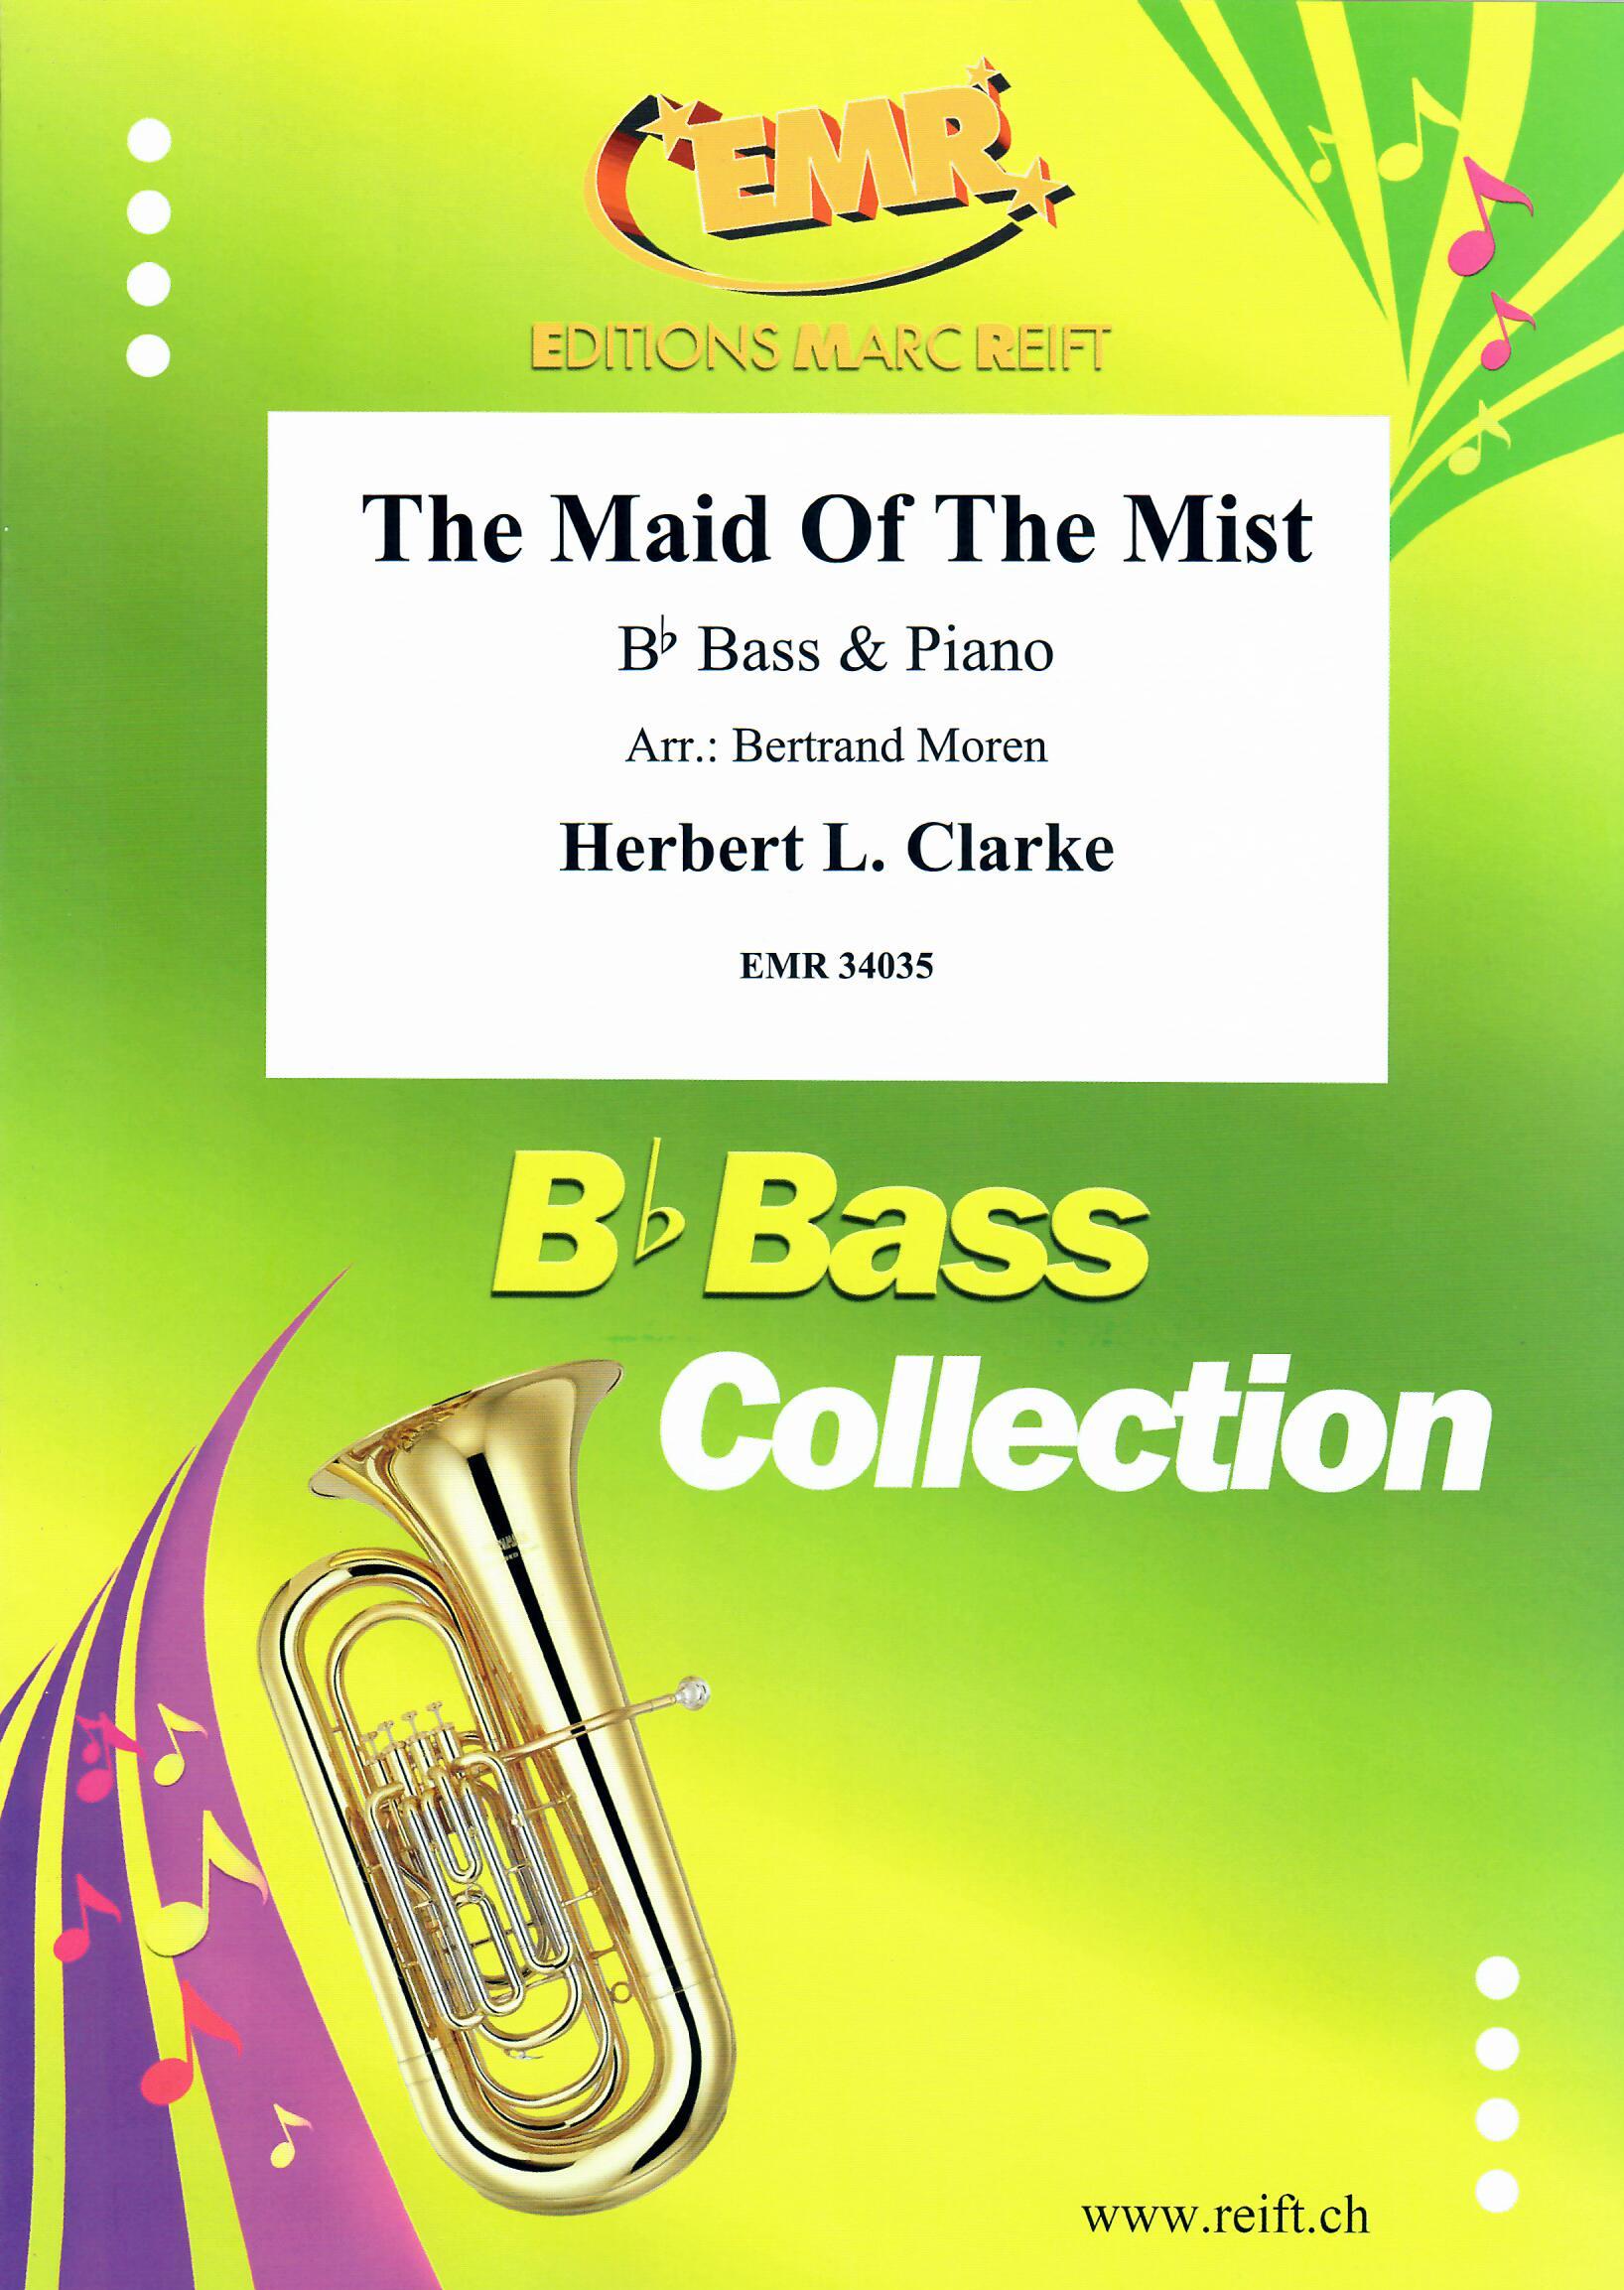 THE MAID OF THE MIST, SOLOS - E♭. Bass